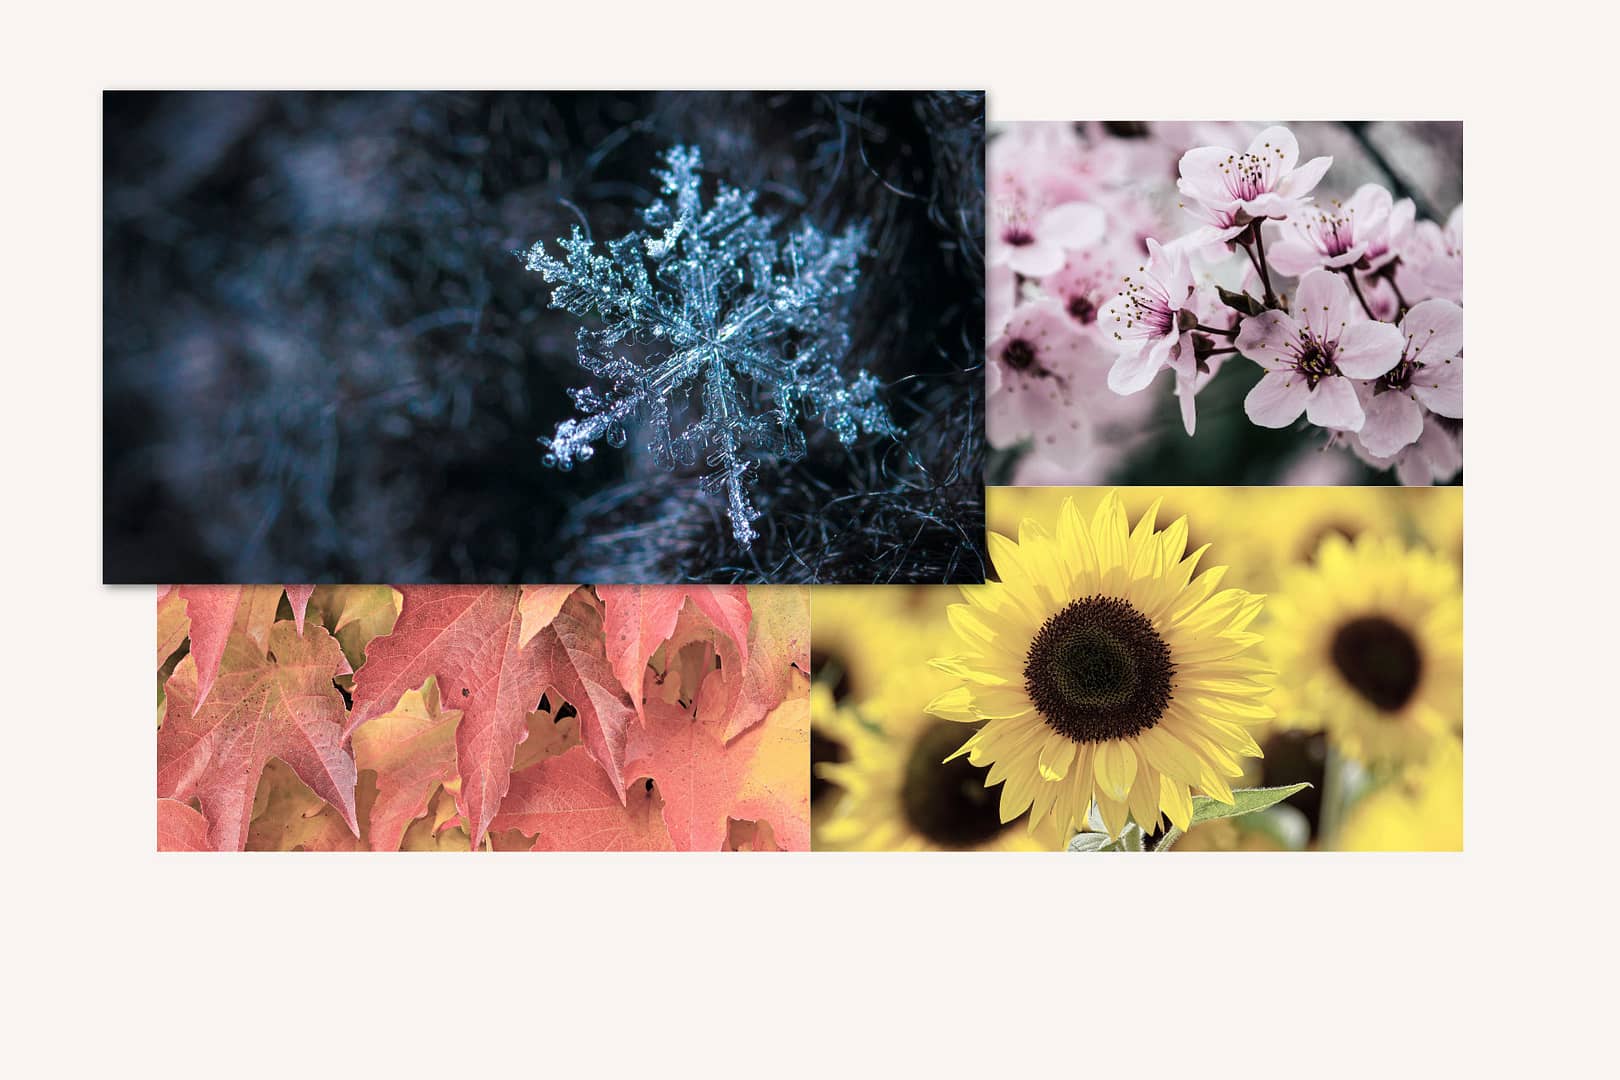 Image with the highlighted photo of a blue-ish snowflake on the upper left side of the image, and in the background each a photo of soft pink cherry blossoms on the upper right side, yellow sunflowers in the lower right side and orange-red maple leaves on the lower left side